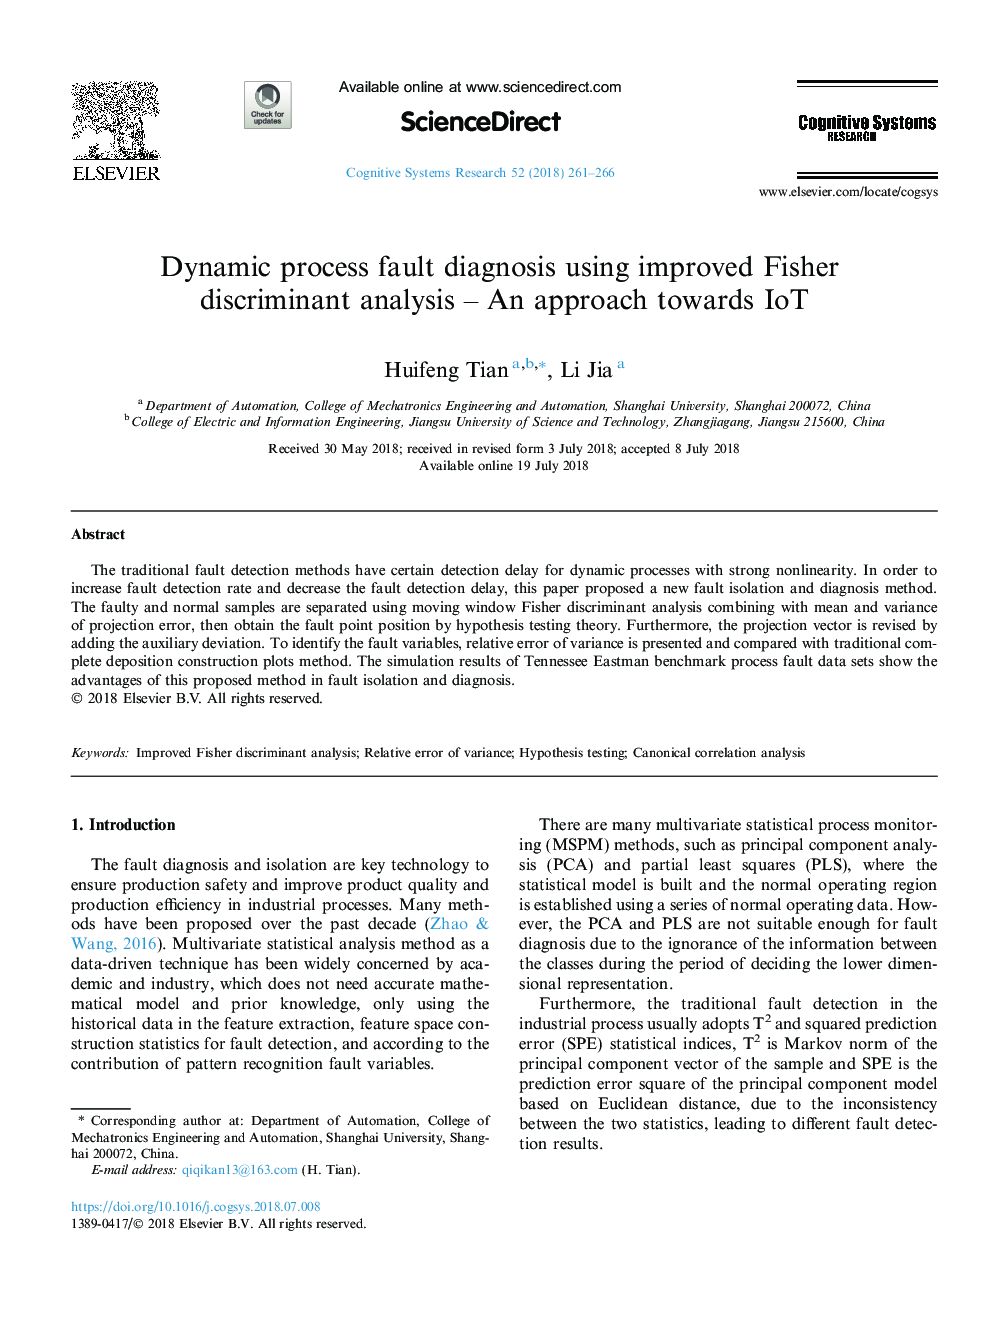 Dynamic process fault diagnosis using improved Fisher discriminant analysis - An approach towards IoT